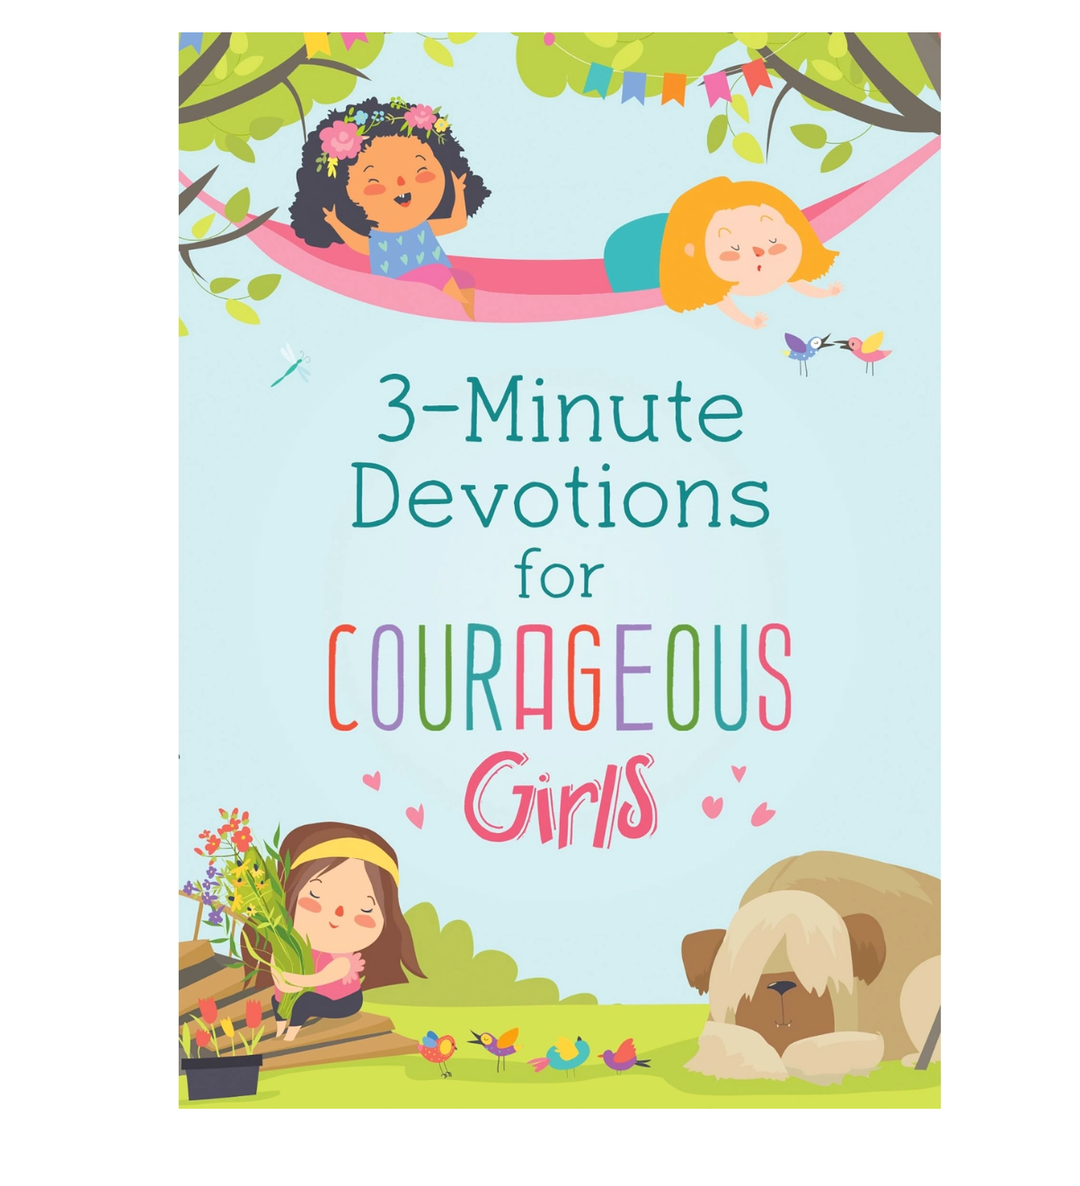 3 MINUTES DEVOTIONS FOR COURAGOUS GIRLS